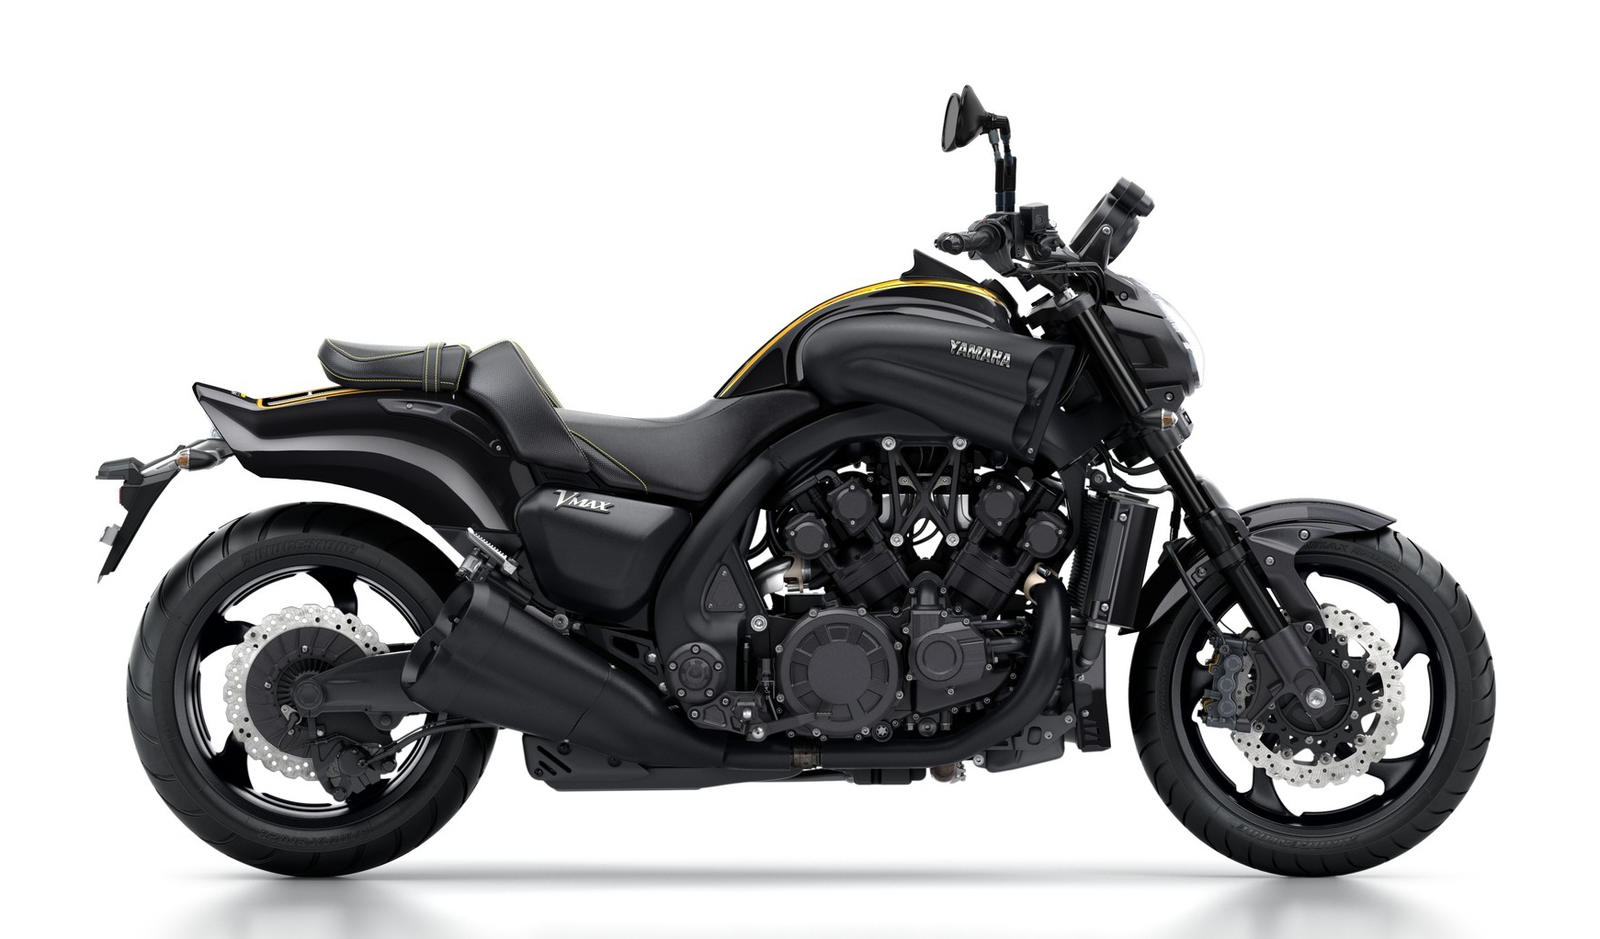 yamaha-vmax-60th-anniversary-shows-how-the-bike-should-really-be-like-photo-gallery-17-1